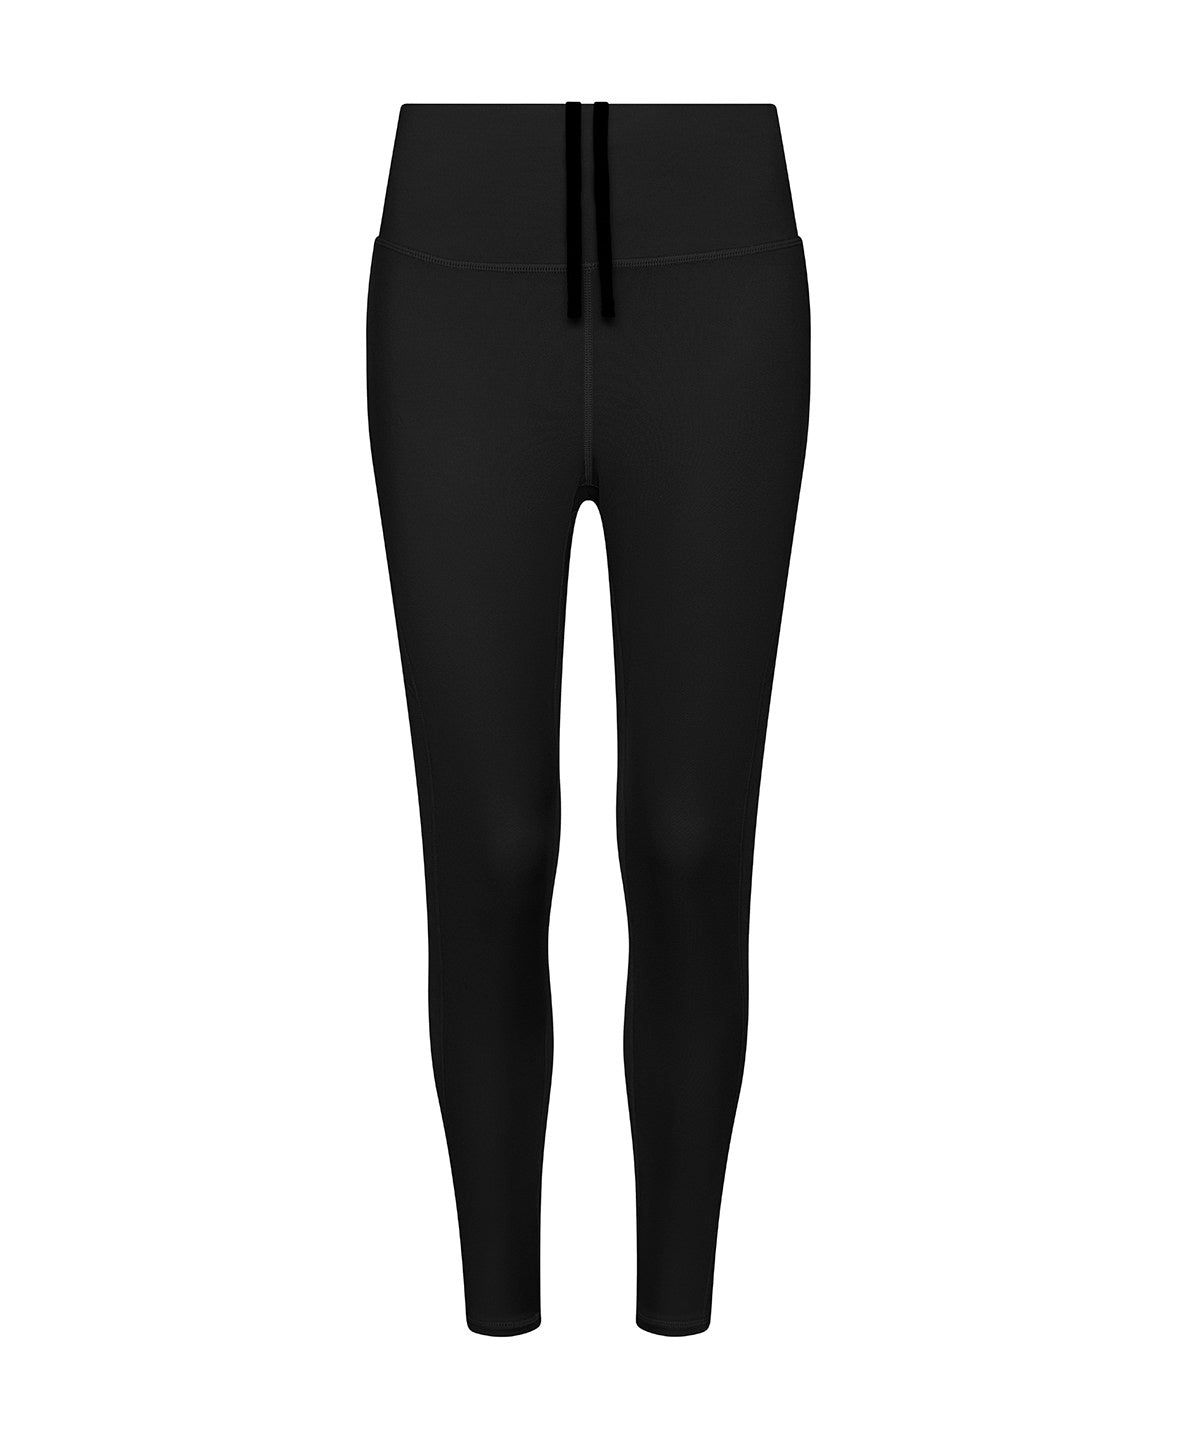 Women's Recycled Technicial Leggings